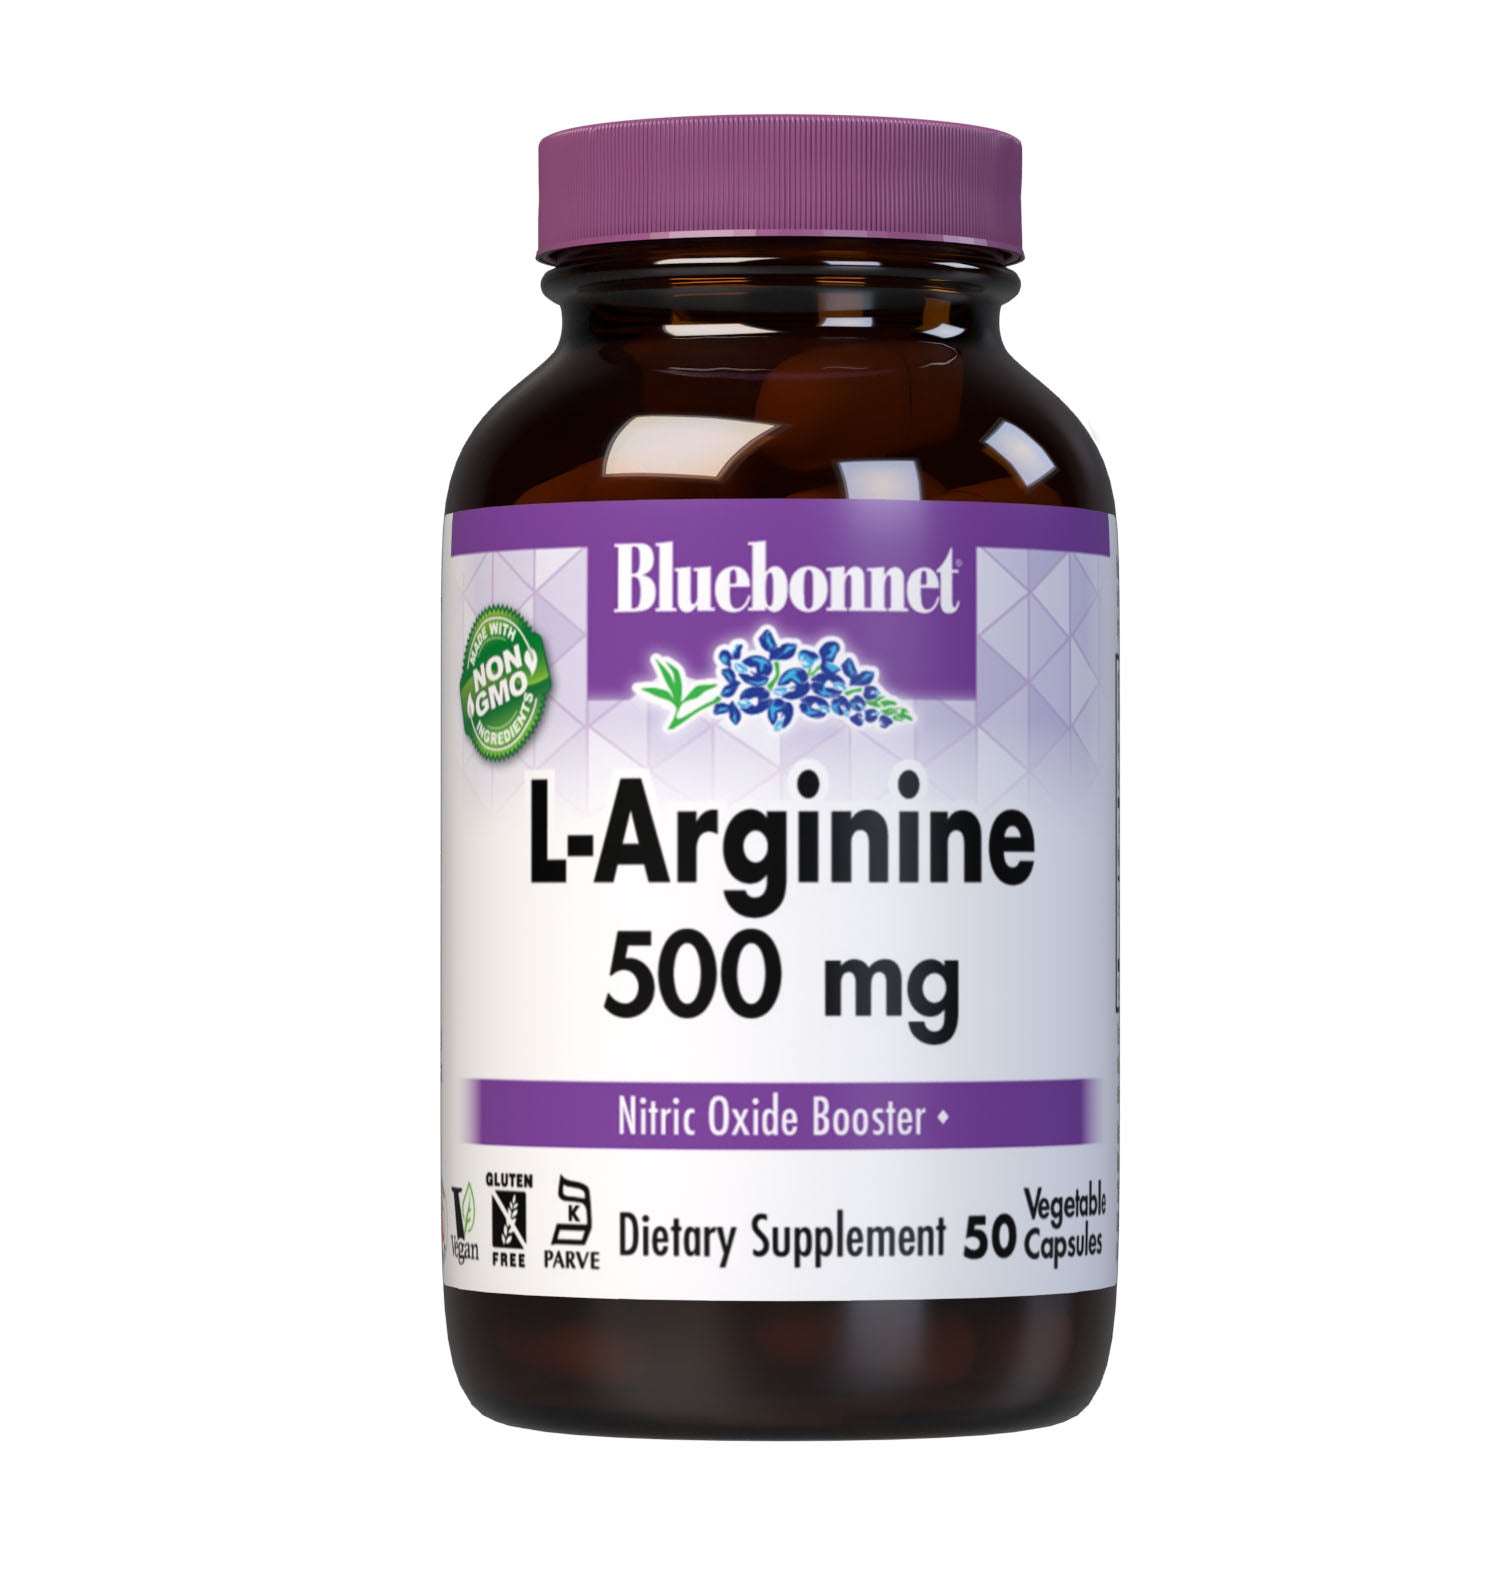 Bluebonnet’s L-Arginine 500 mg 50 vegetable capsules are formulated with the free form amino acid L-arginine in its crystalline form from Ajinomoto which promotes nitric oxide synthesis and men's health. #size_50 count